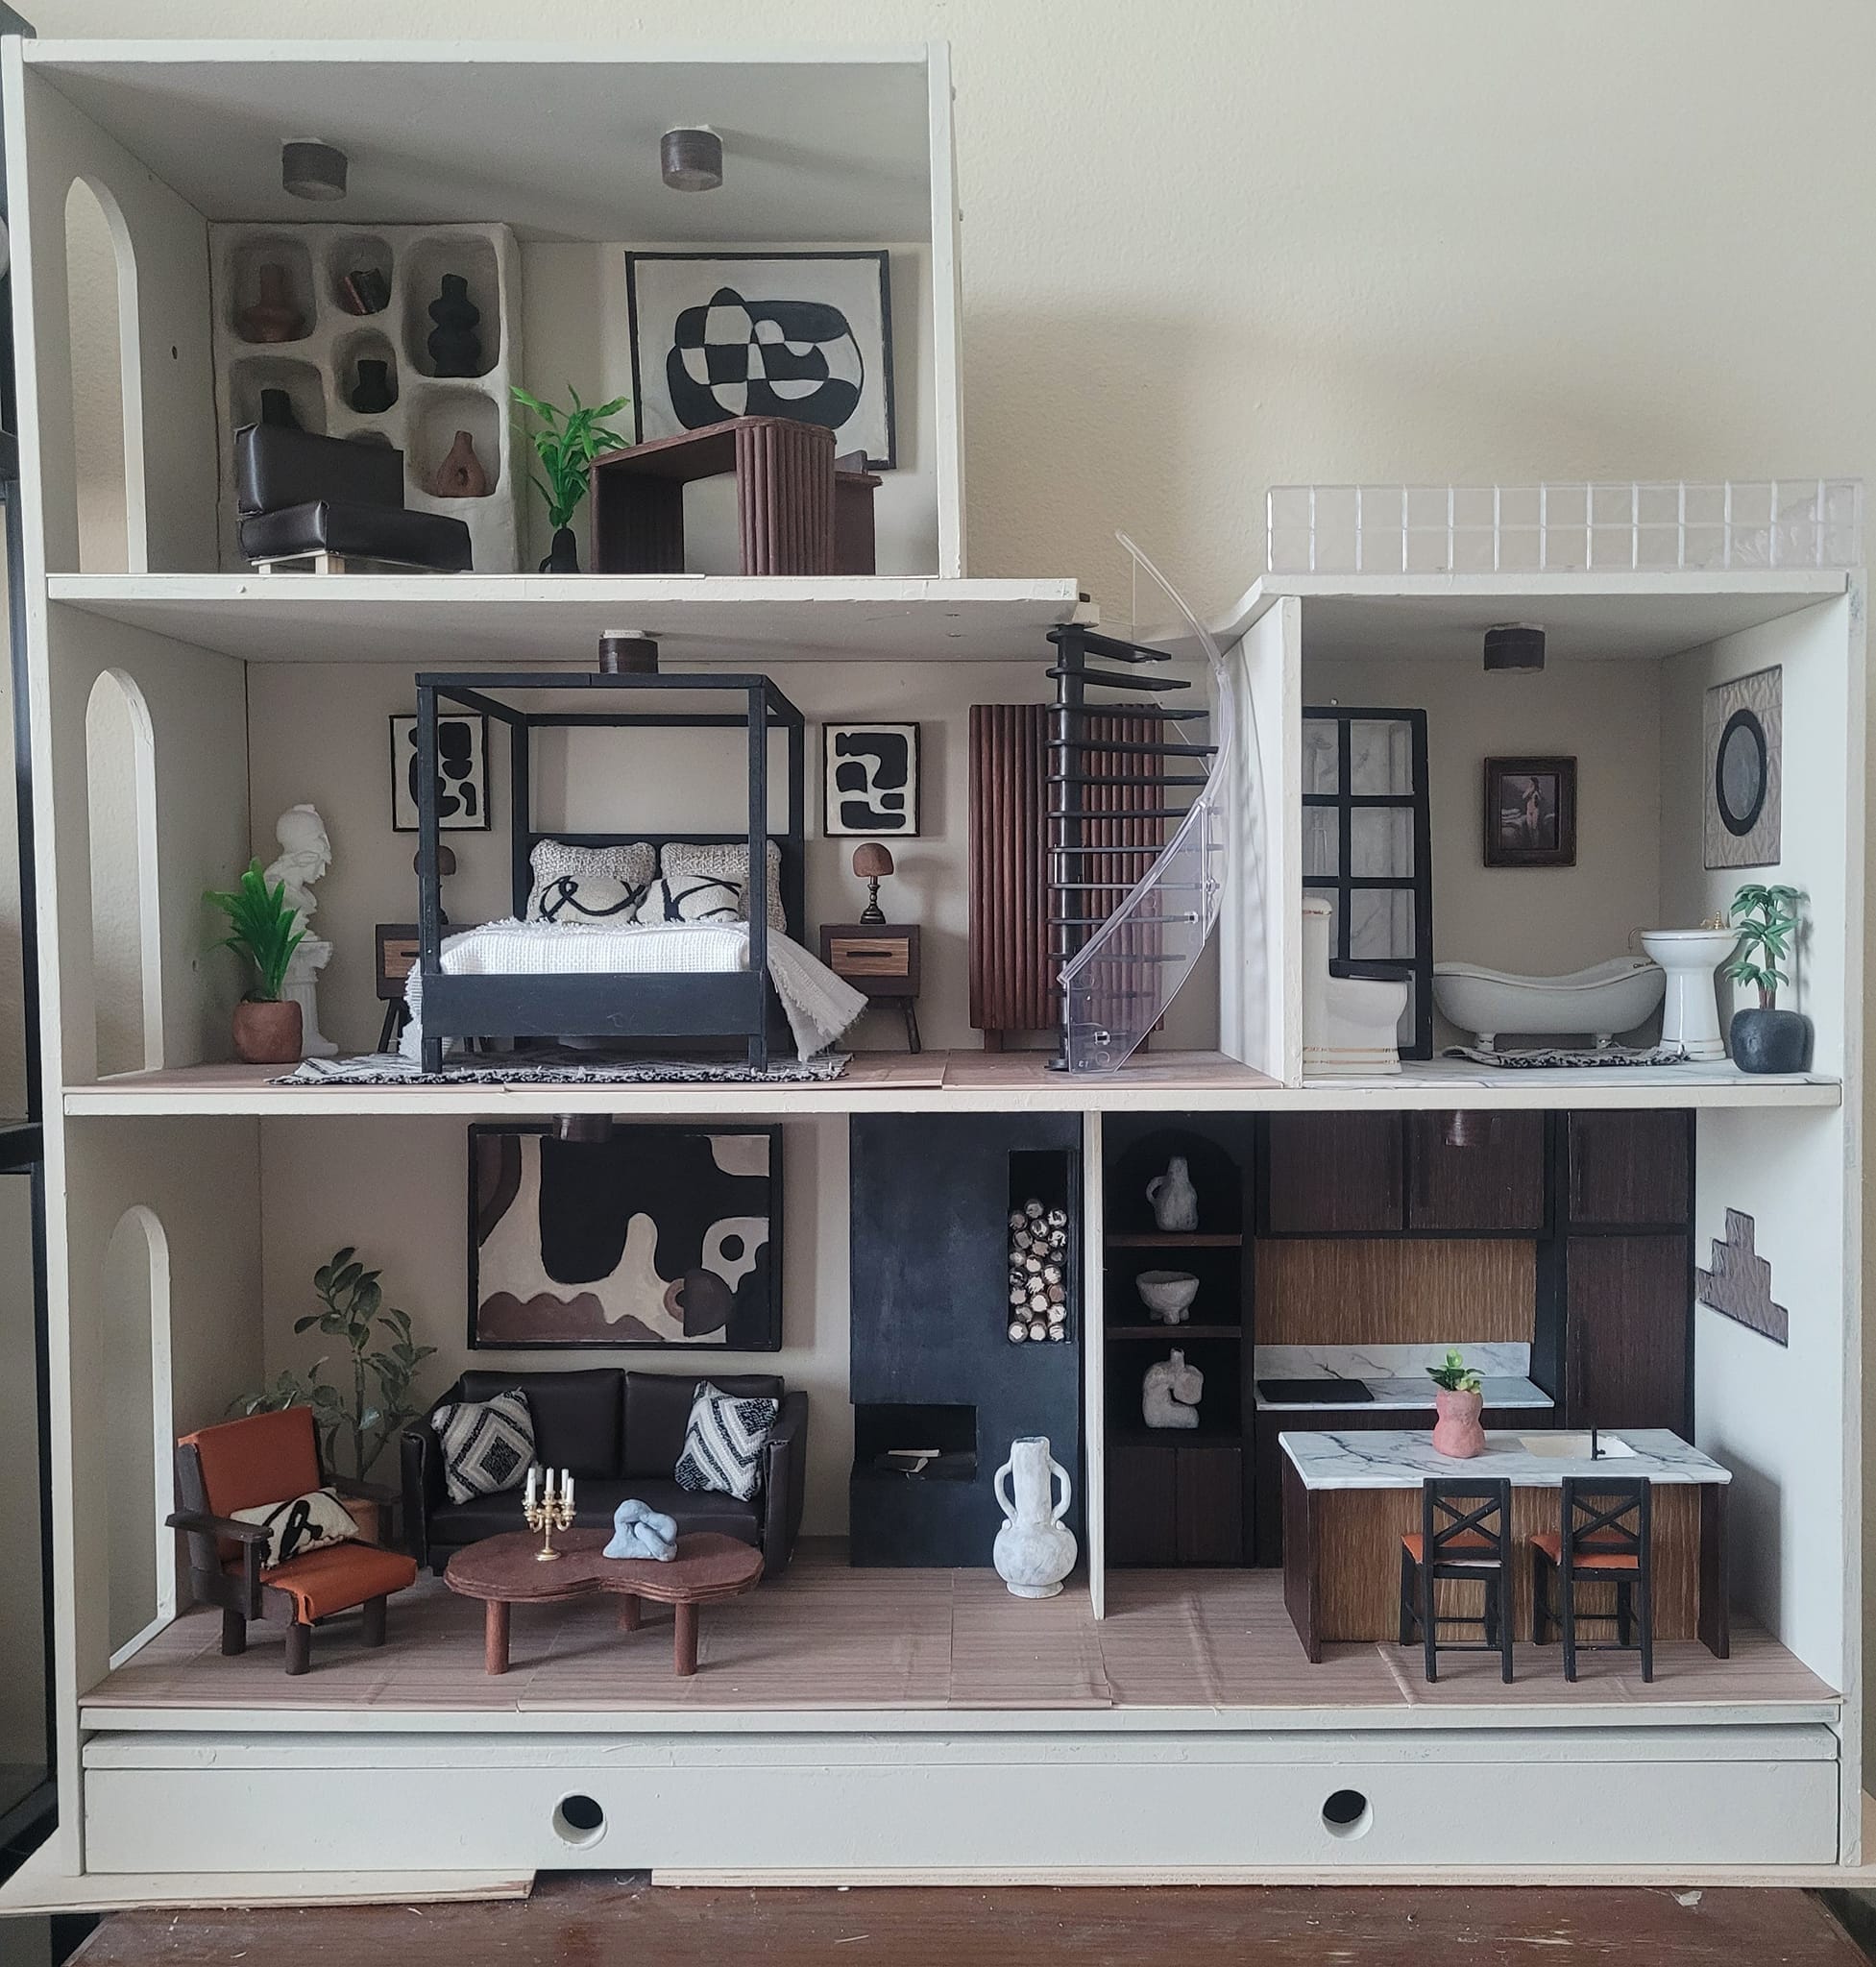 Dolls house  Doll house, Dolls house interiors, Miniature rooms